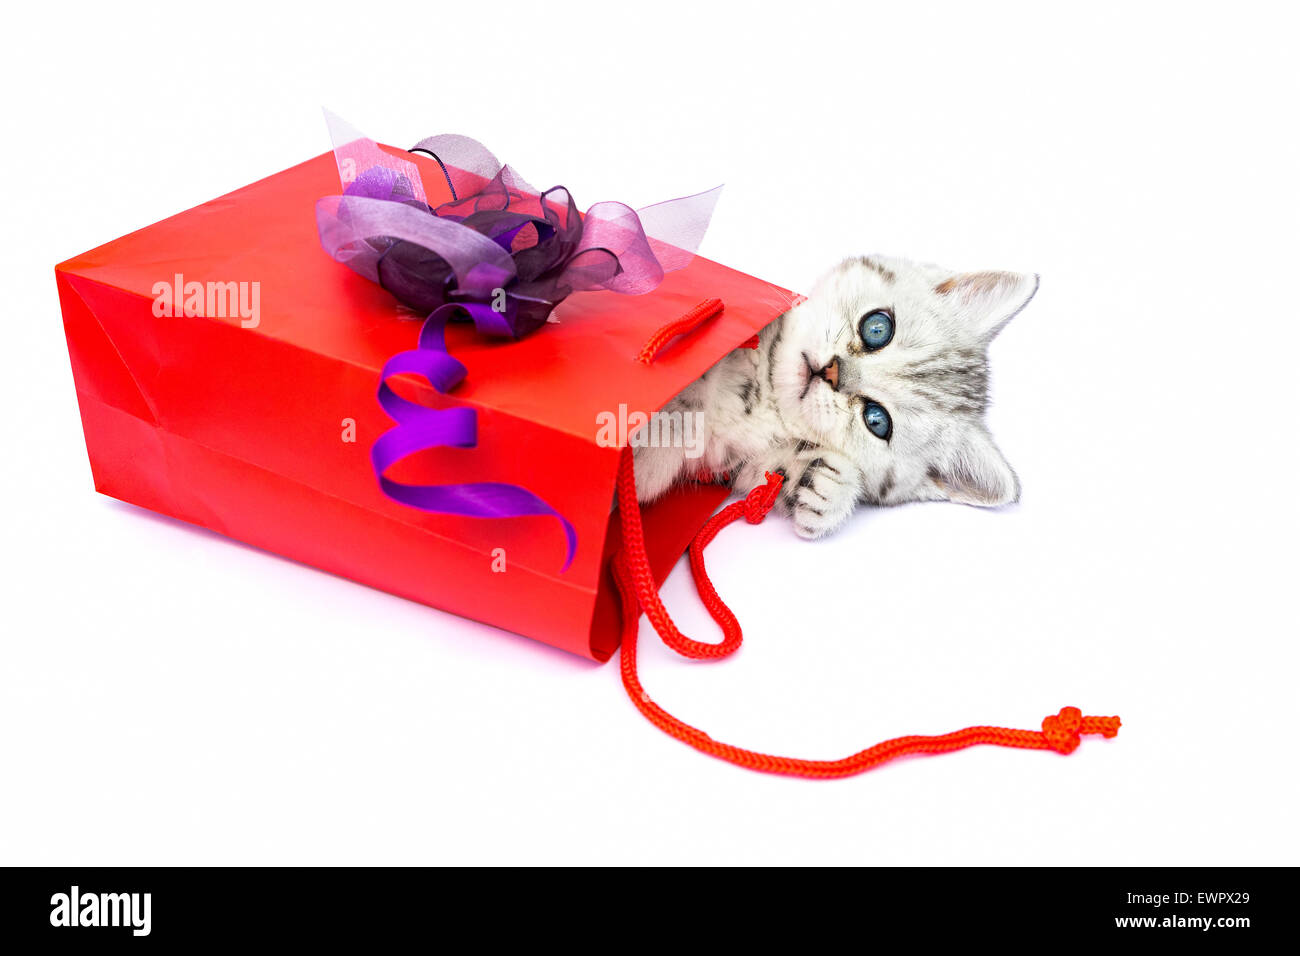 Young kitten lying in red bag with decoration as present isolated on white background Stock Photo